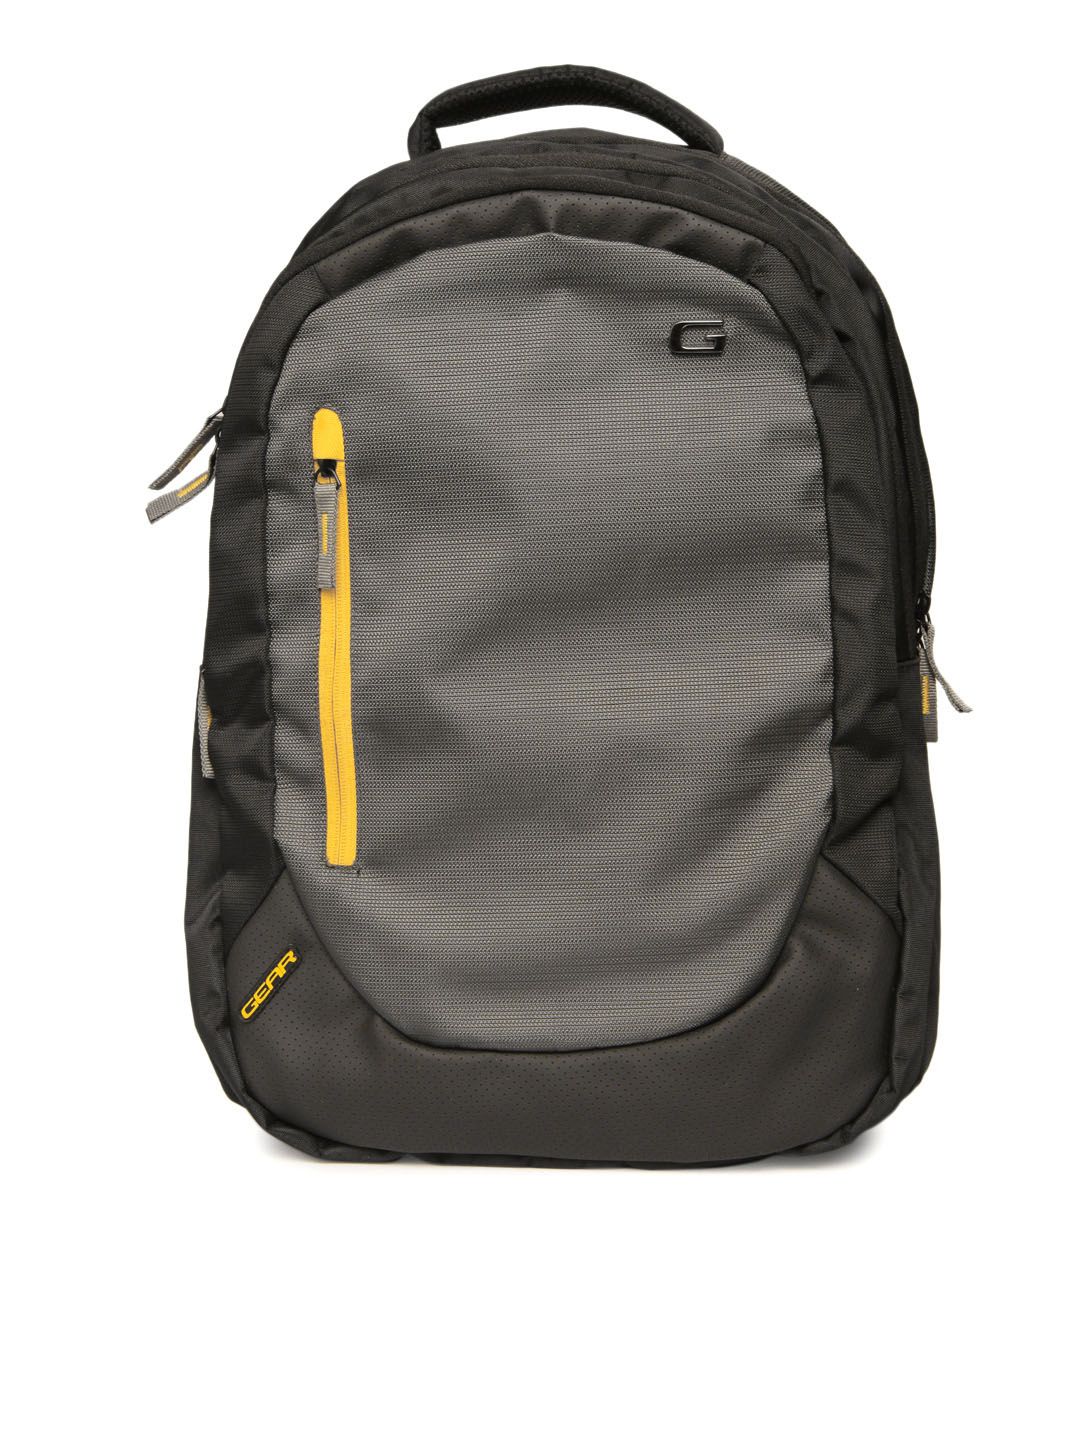 Gear Unisex Grey & Black Eco 1 Laptop Backpack Price in India